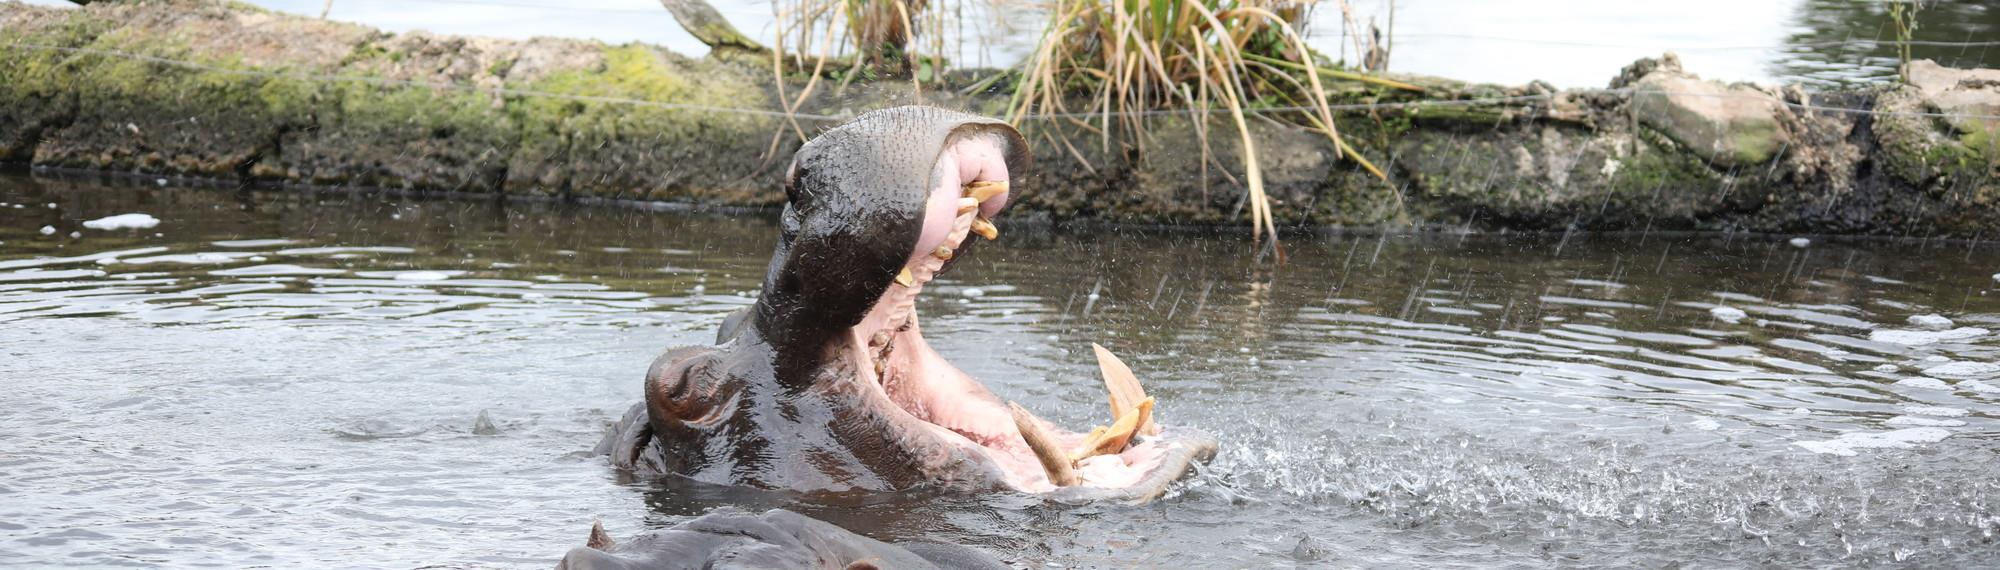 A Hippopotamus opening their mouth, with eyes closed, in a lake.